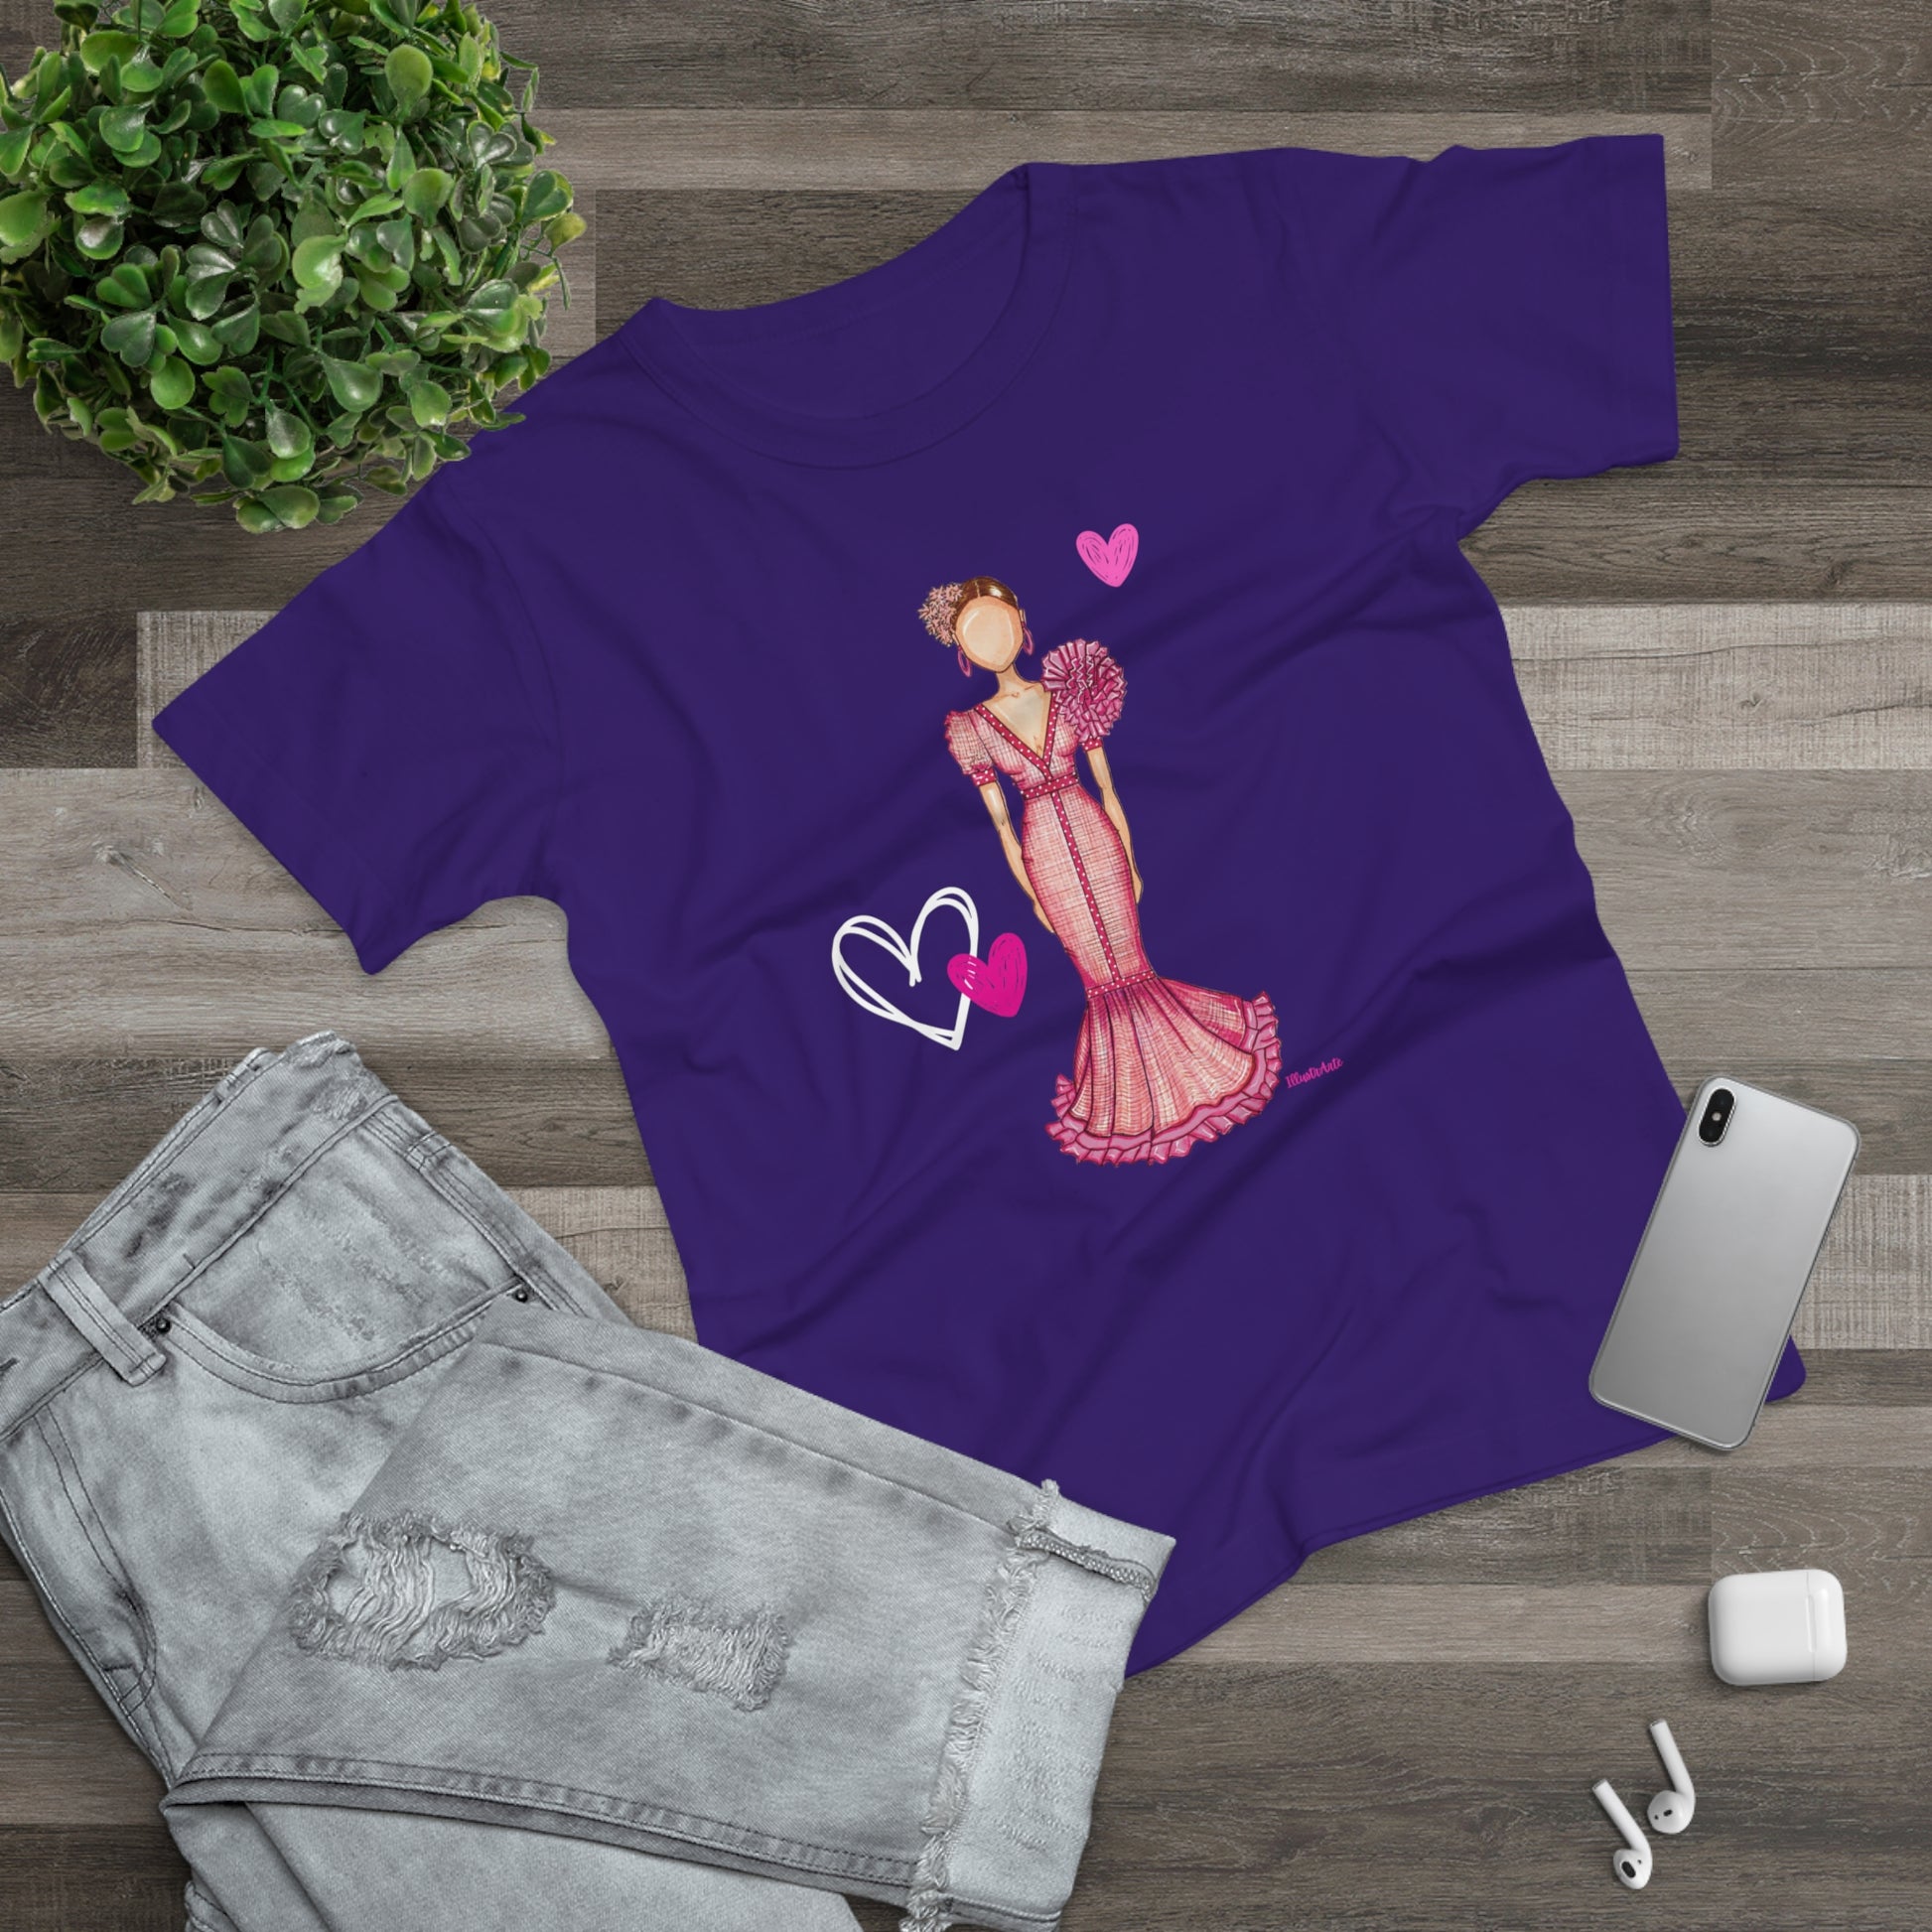 a purple t - shirt with a picture of a woman in a dress